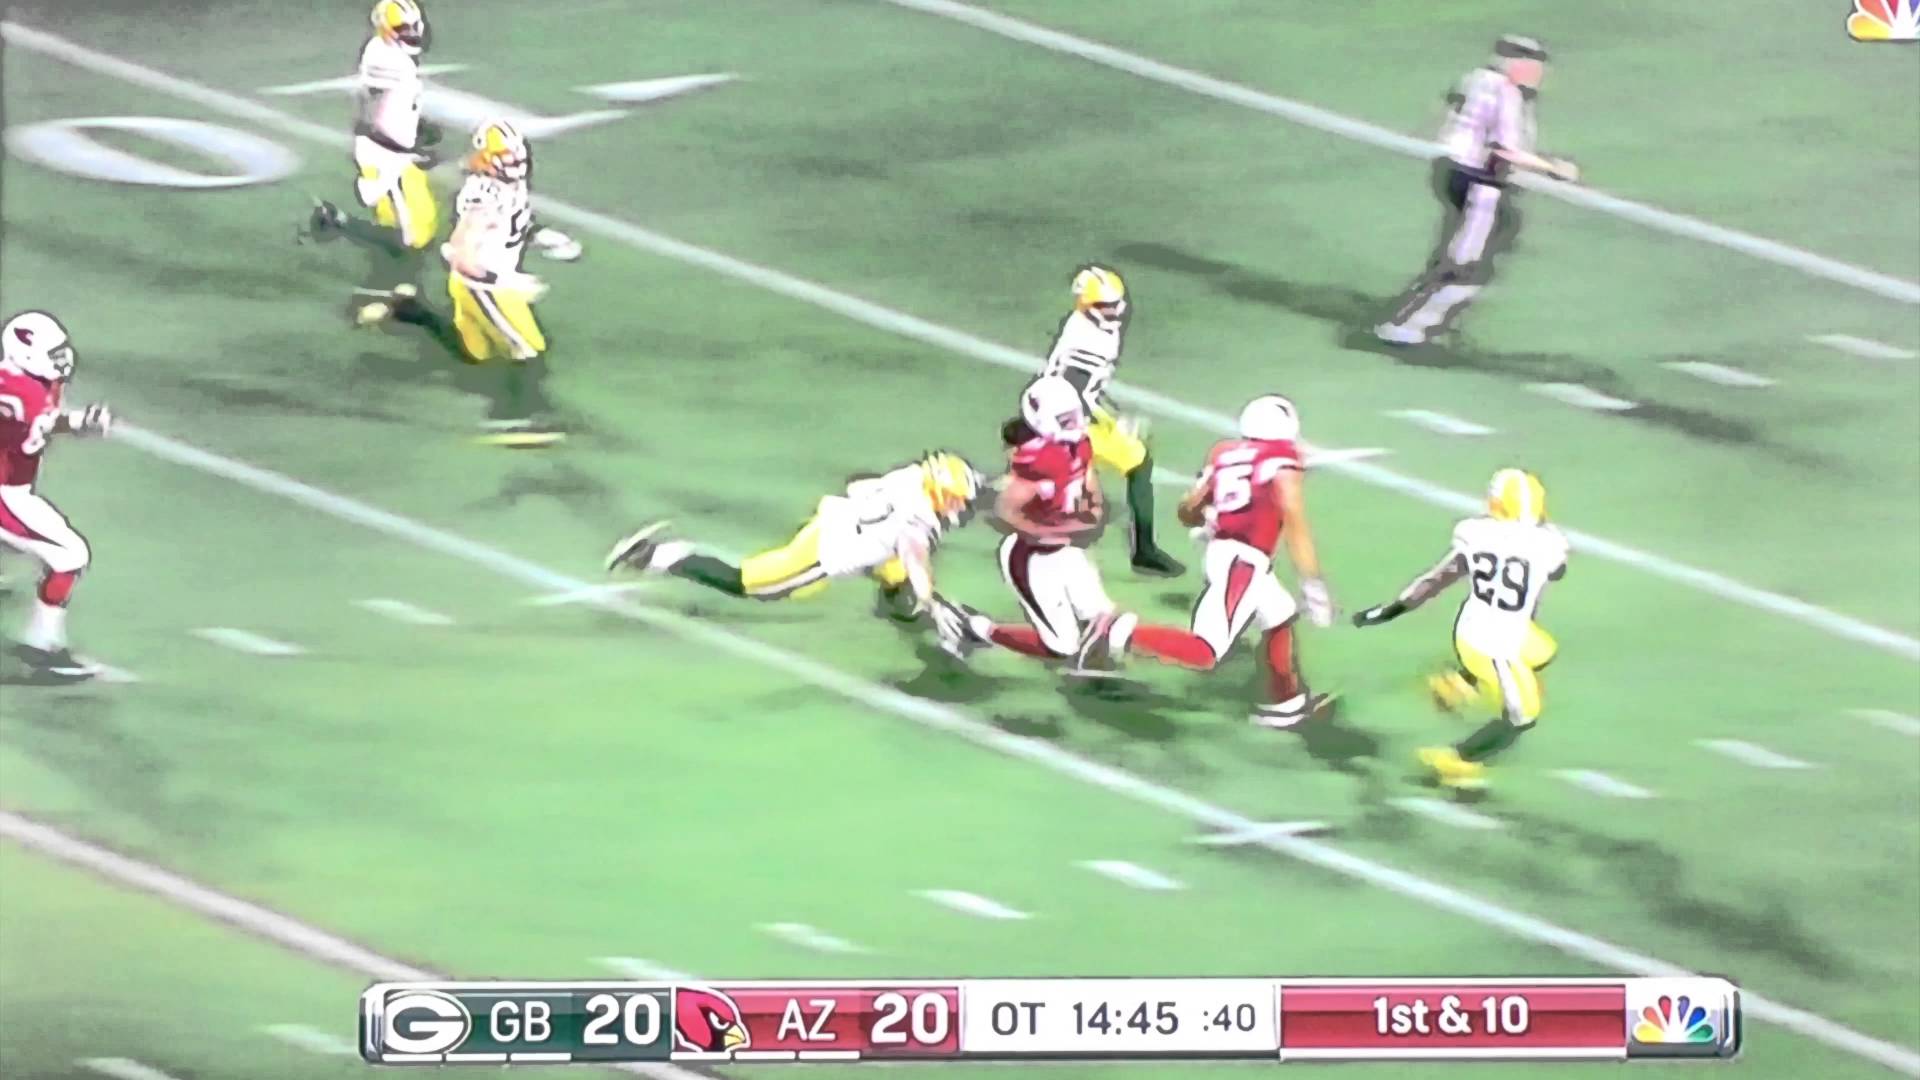 Larry Fitzgerald with an amazing 75 yard catch